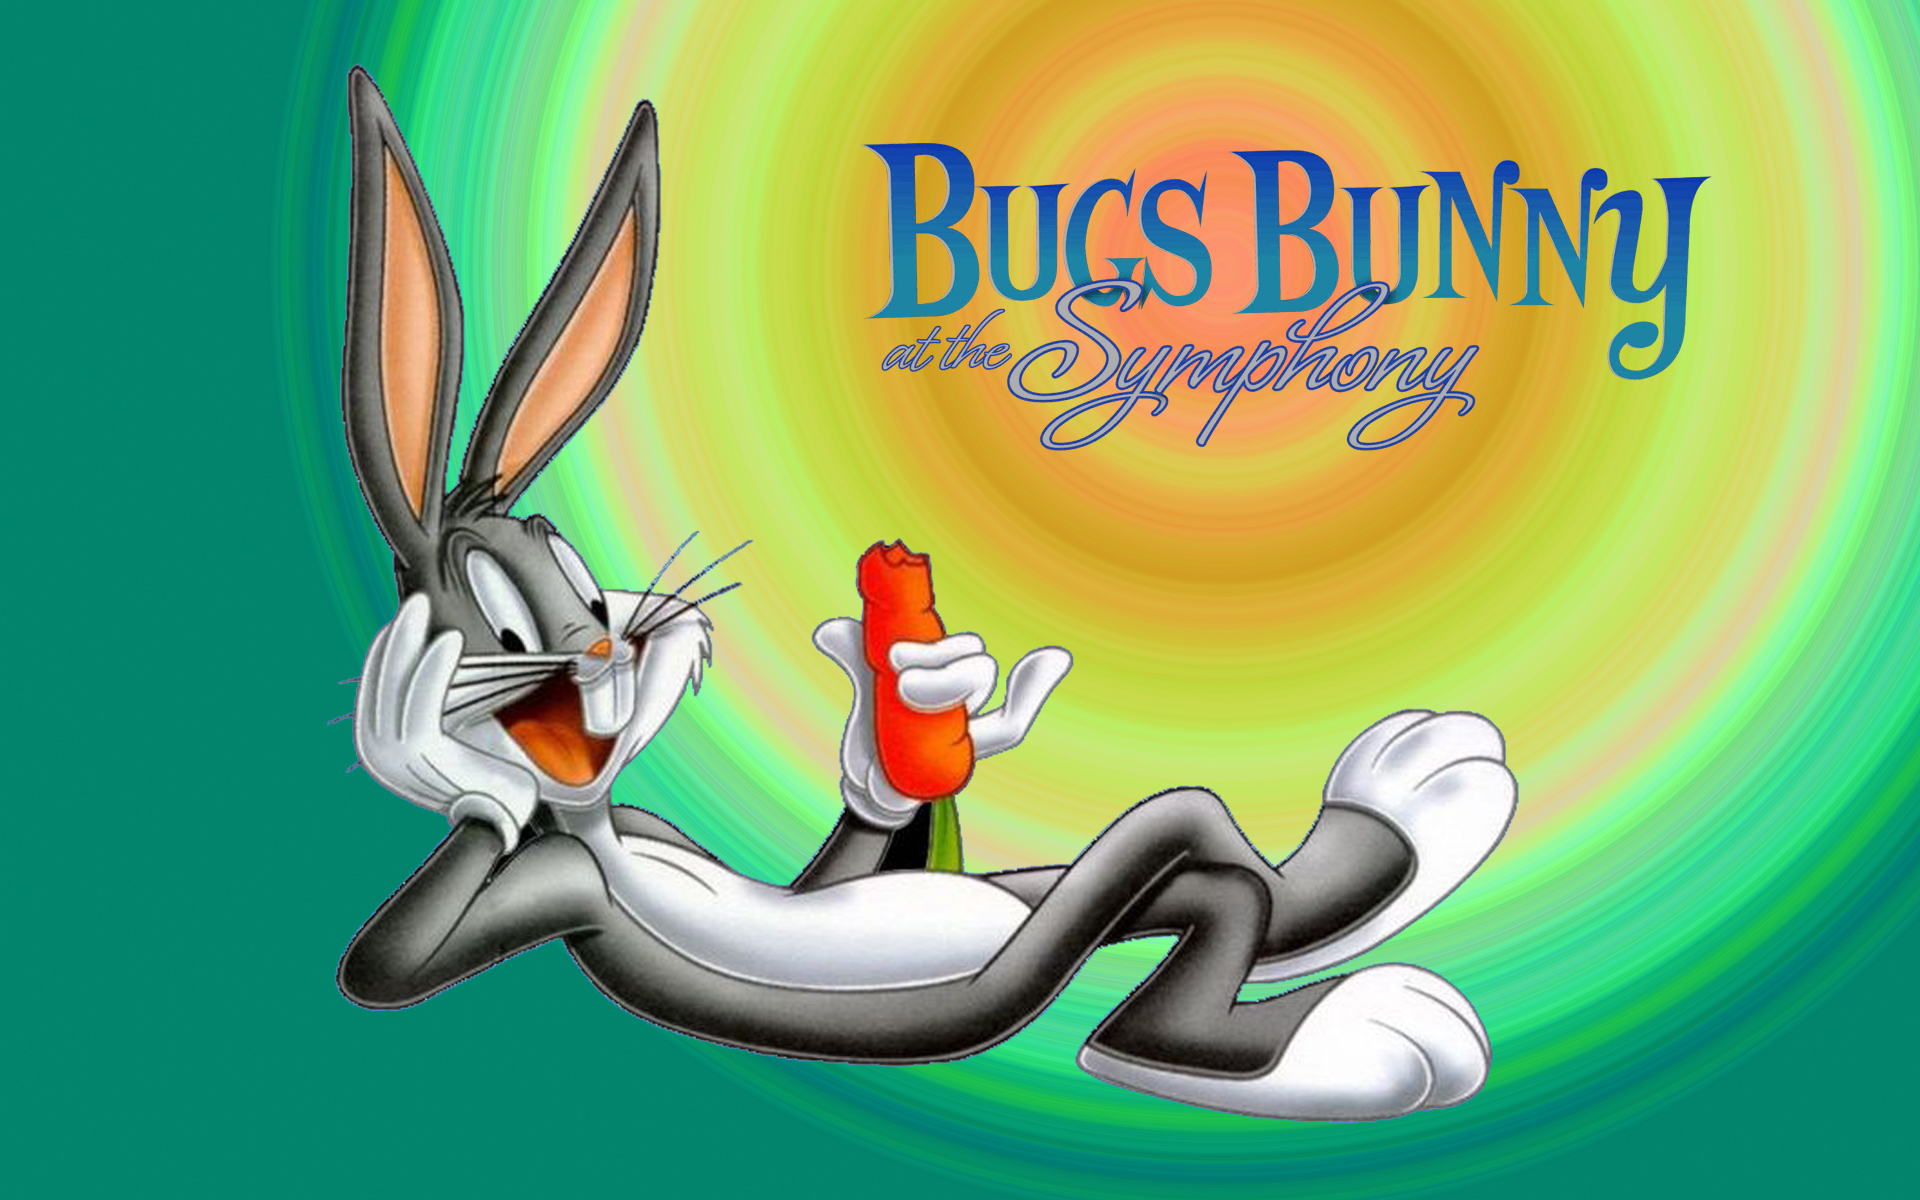 Bugs Bunny Animated Cartoon Character Desktop Hd Wallpaper For Mobile  Phones Tablet And Pc 1920x1200 : 